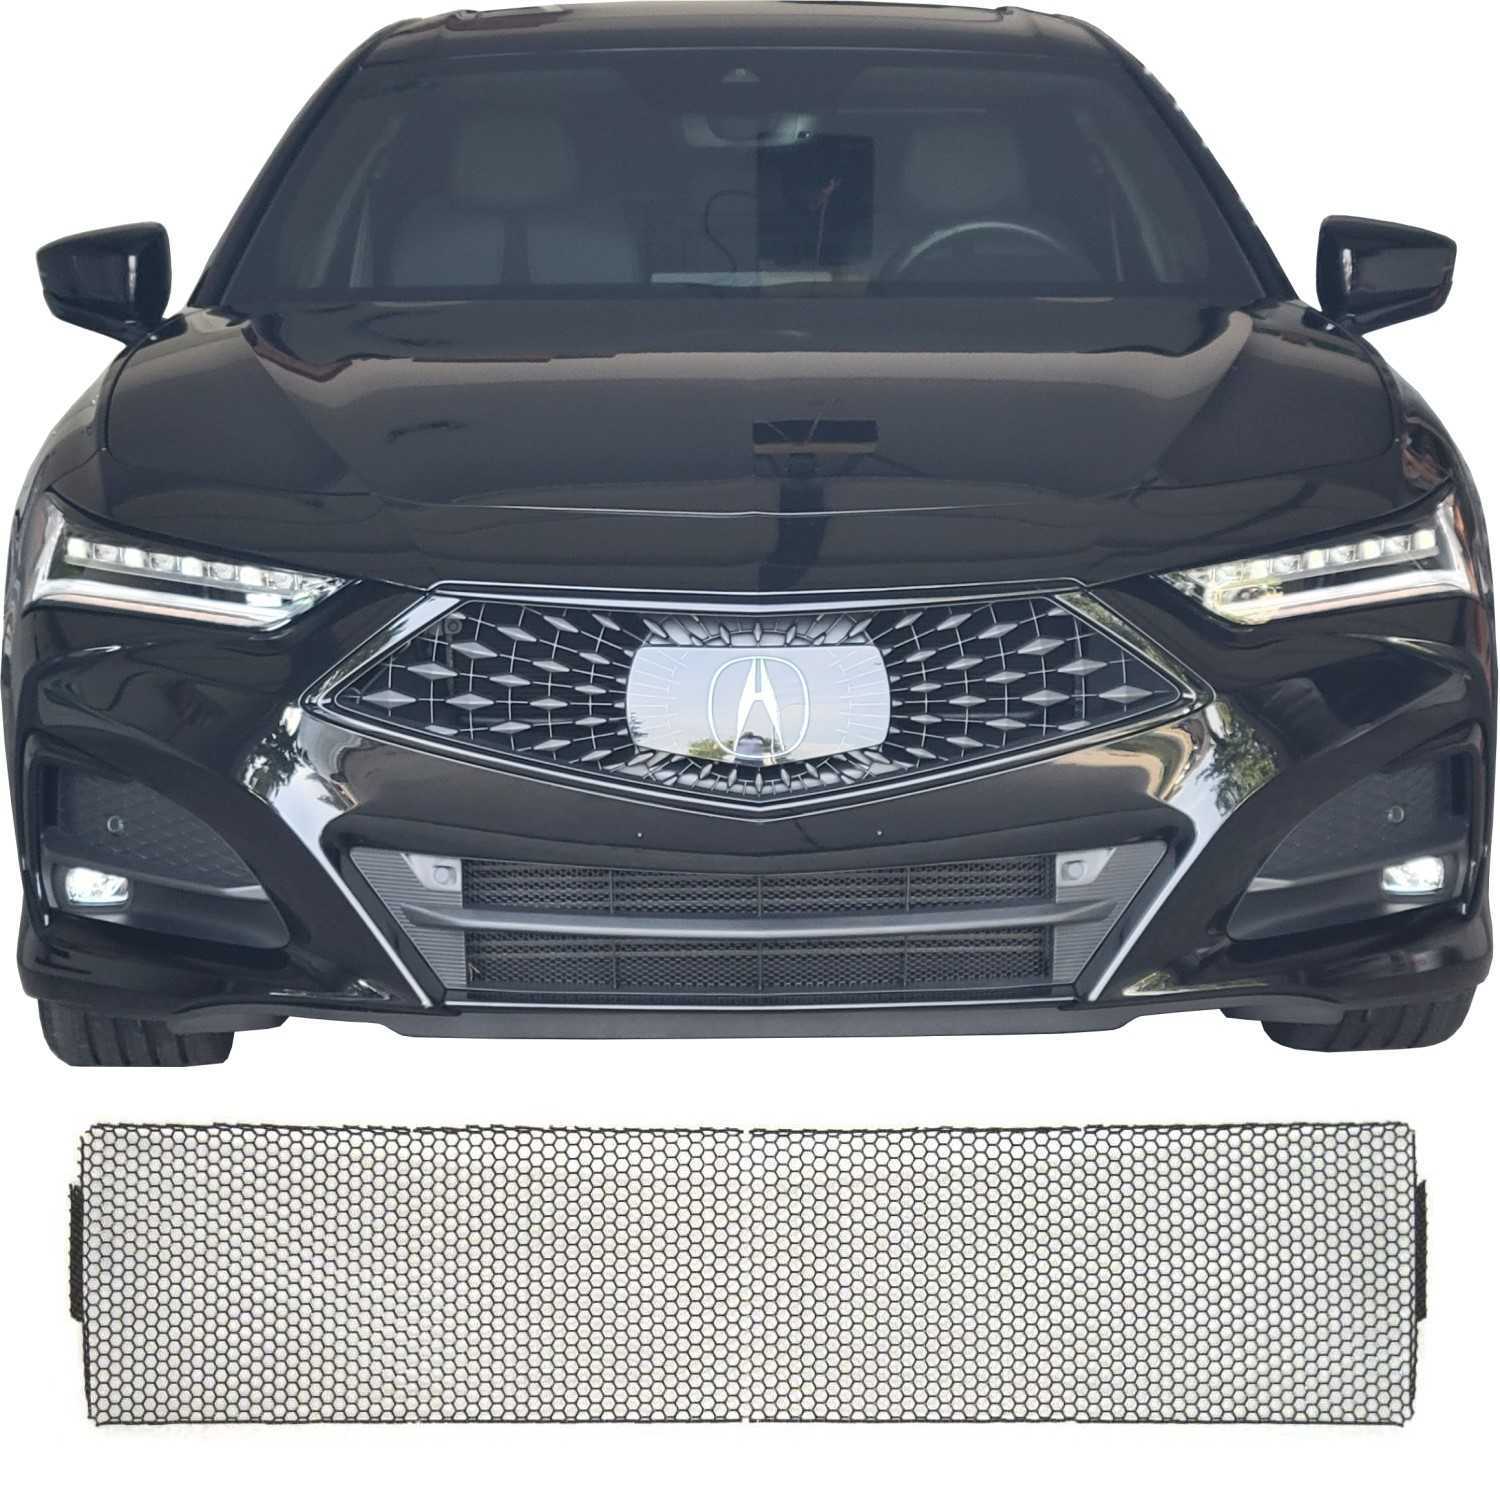 https://www.customcargrills.com/prodimages/Mesh-Grille-Radiator-Protector-Screen-for-Acura-TLX-2021.jpg